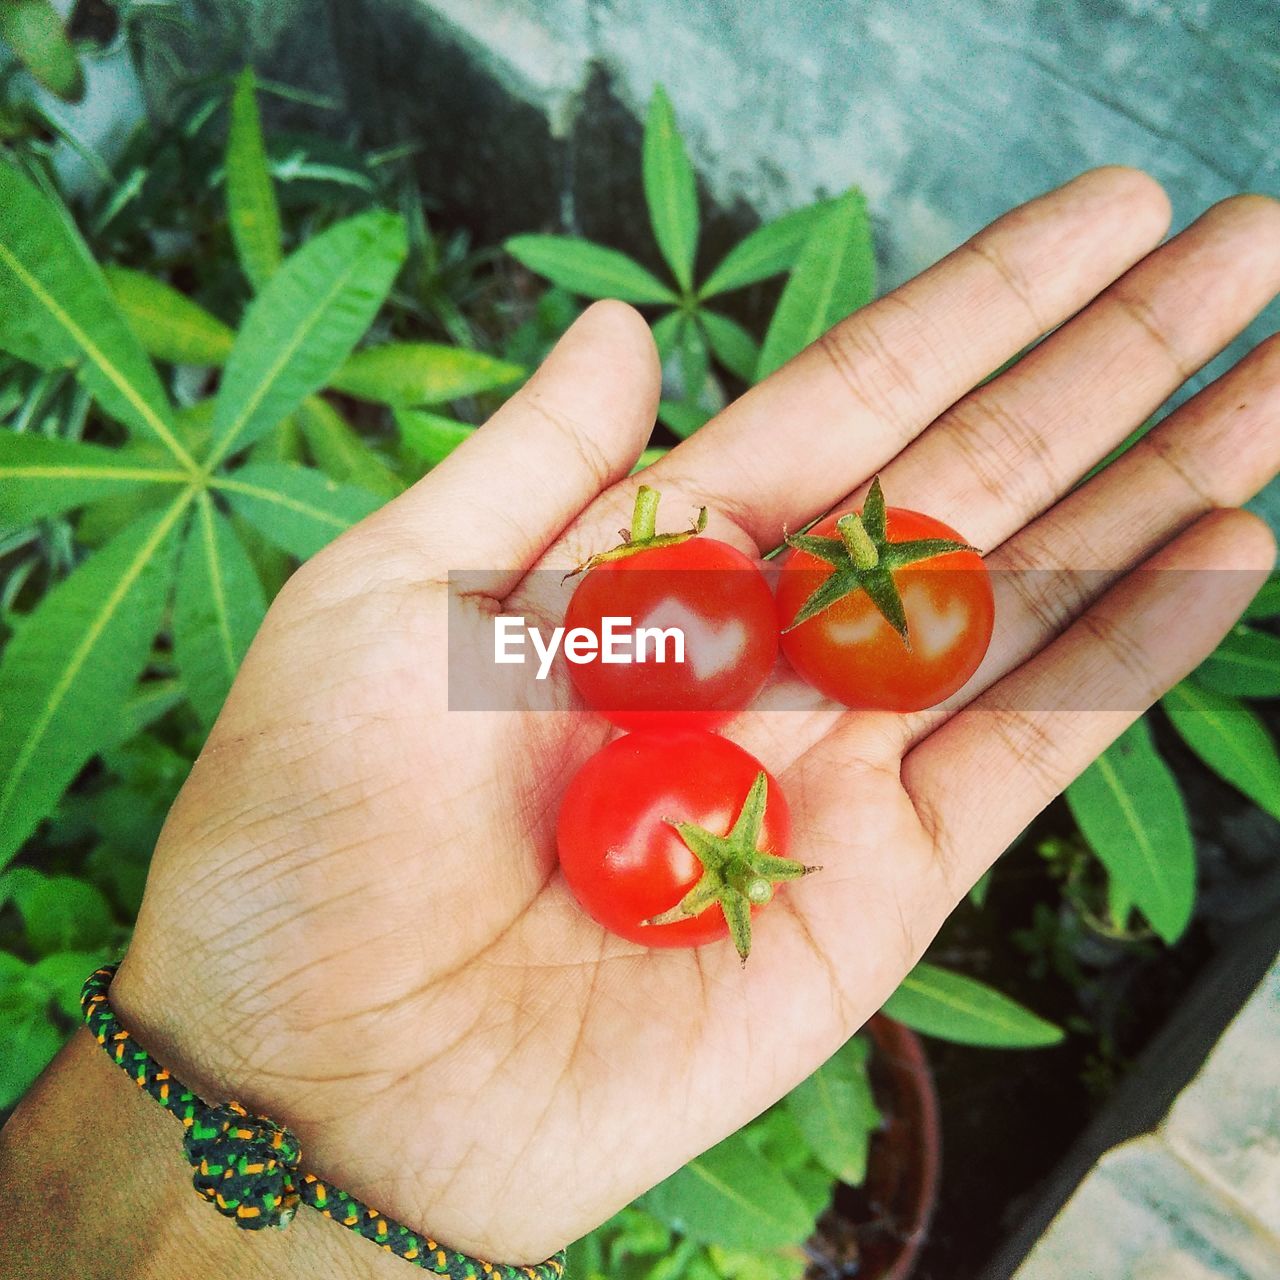 Cropped image of hand holding cherry tomatoes